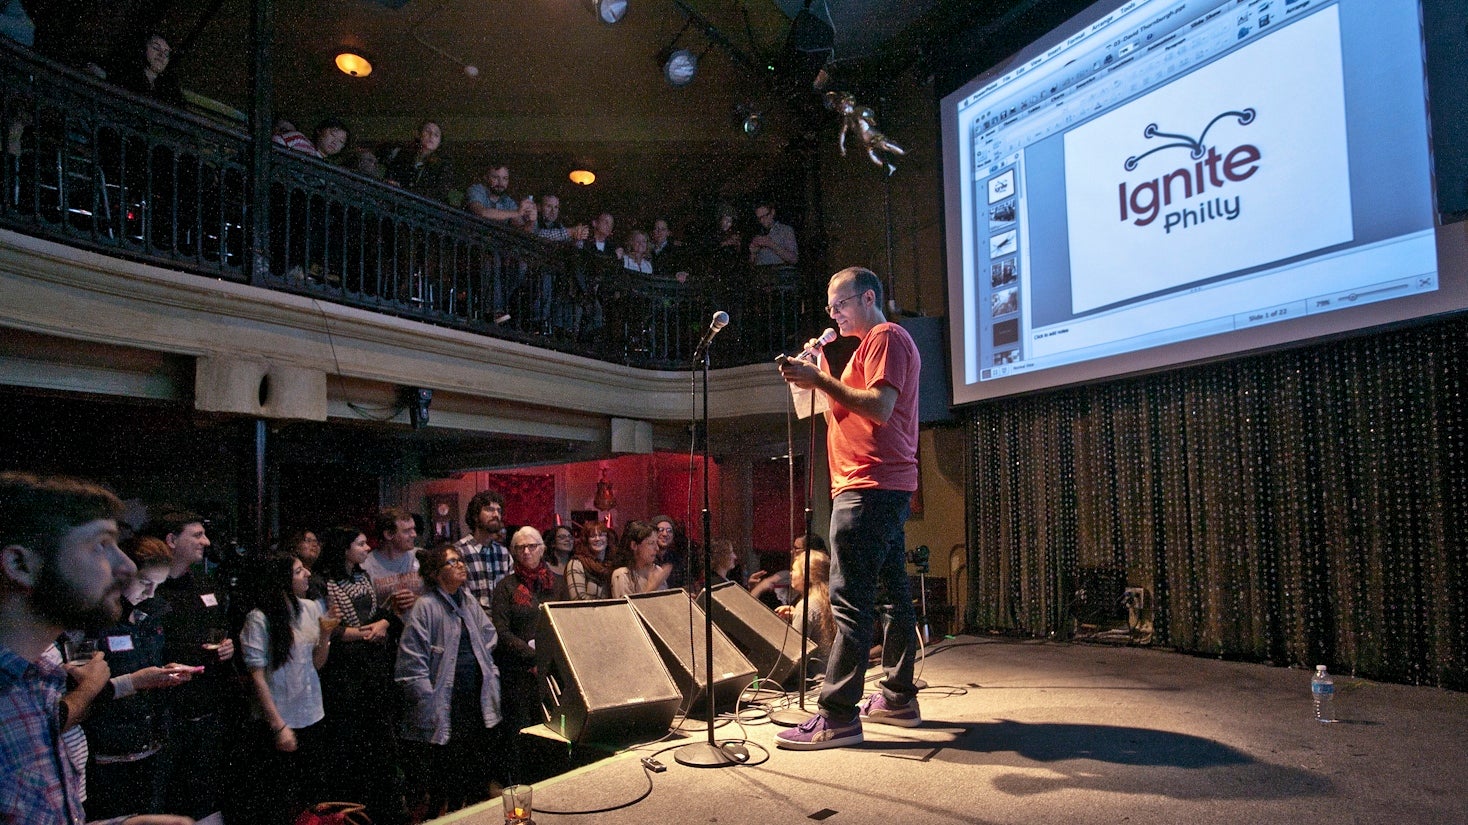  Ignite Philly co-organizer Geoff DiMasi addressing the crowd at Johnny Brenda's. (Photo courtesy of Kevin Monko) 